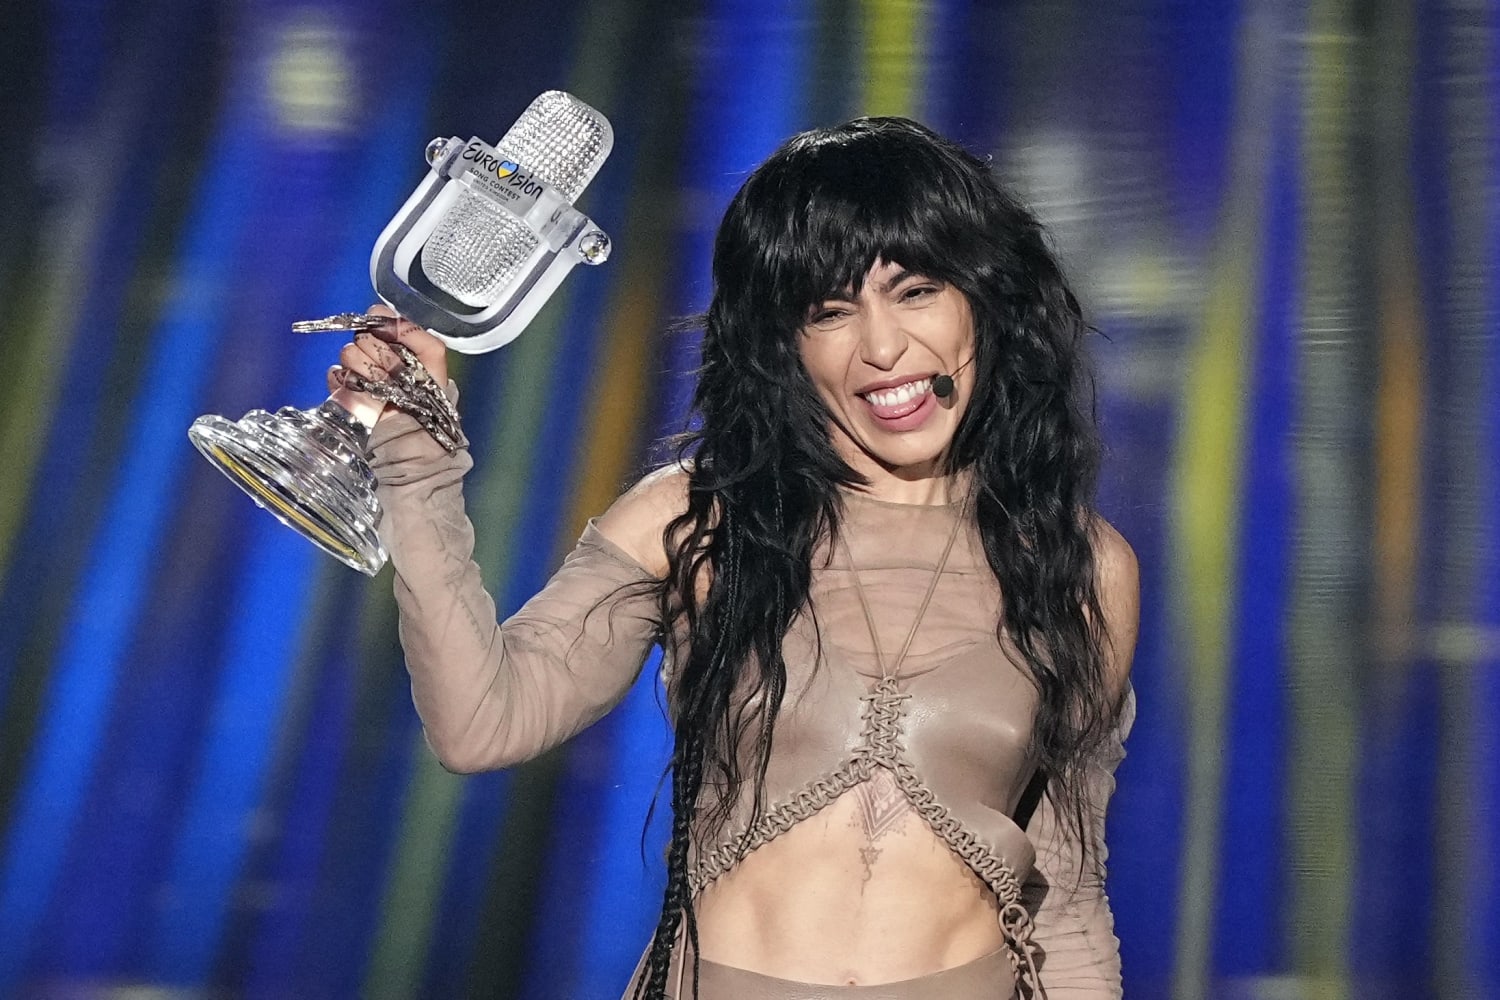 Loreen Eurowizja Swedish singer Loreen wins Eurovision Song Contest for a 2nd time